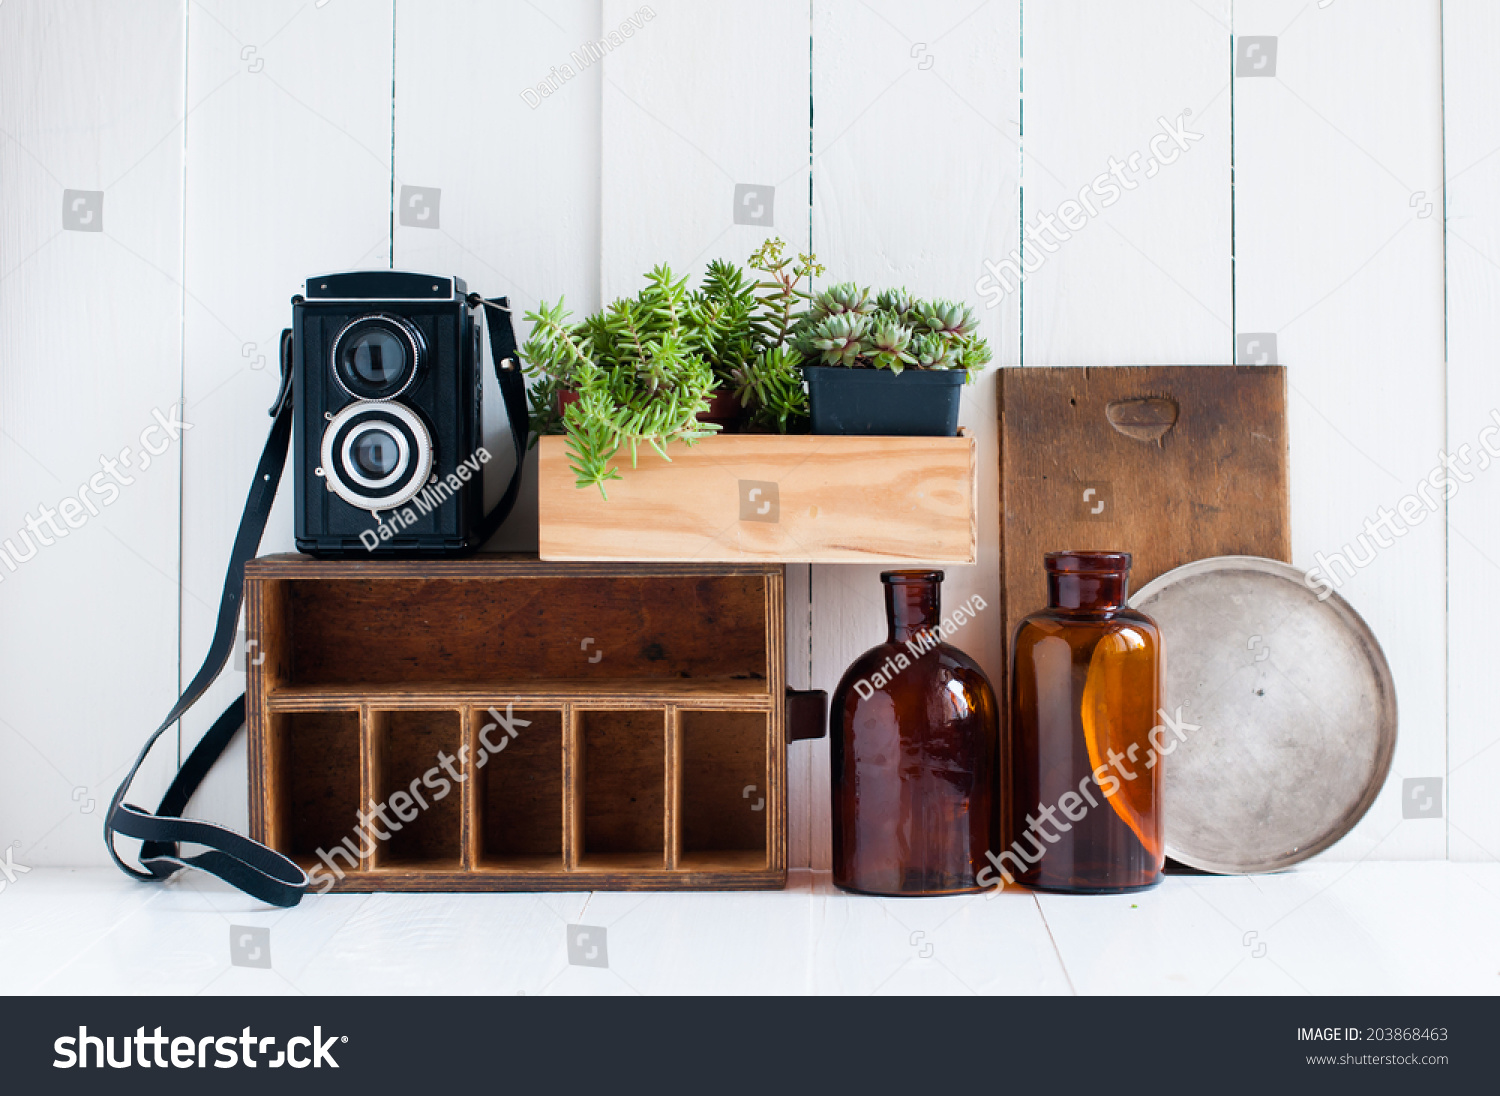 Vintage home decor: old wooden boxes, houseplants, camera and old brown glass bottles on white wooden board, retro home interior. #203868463